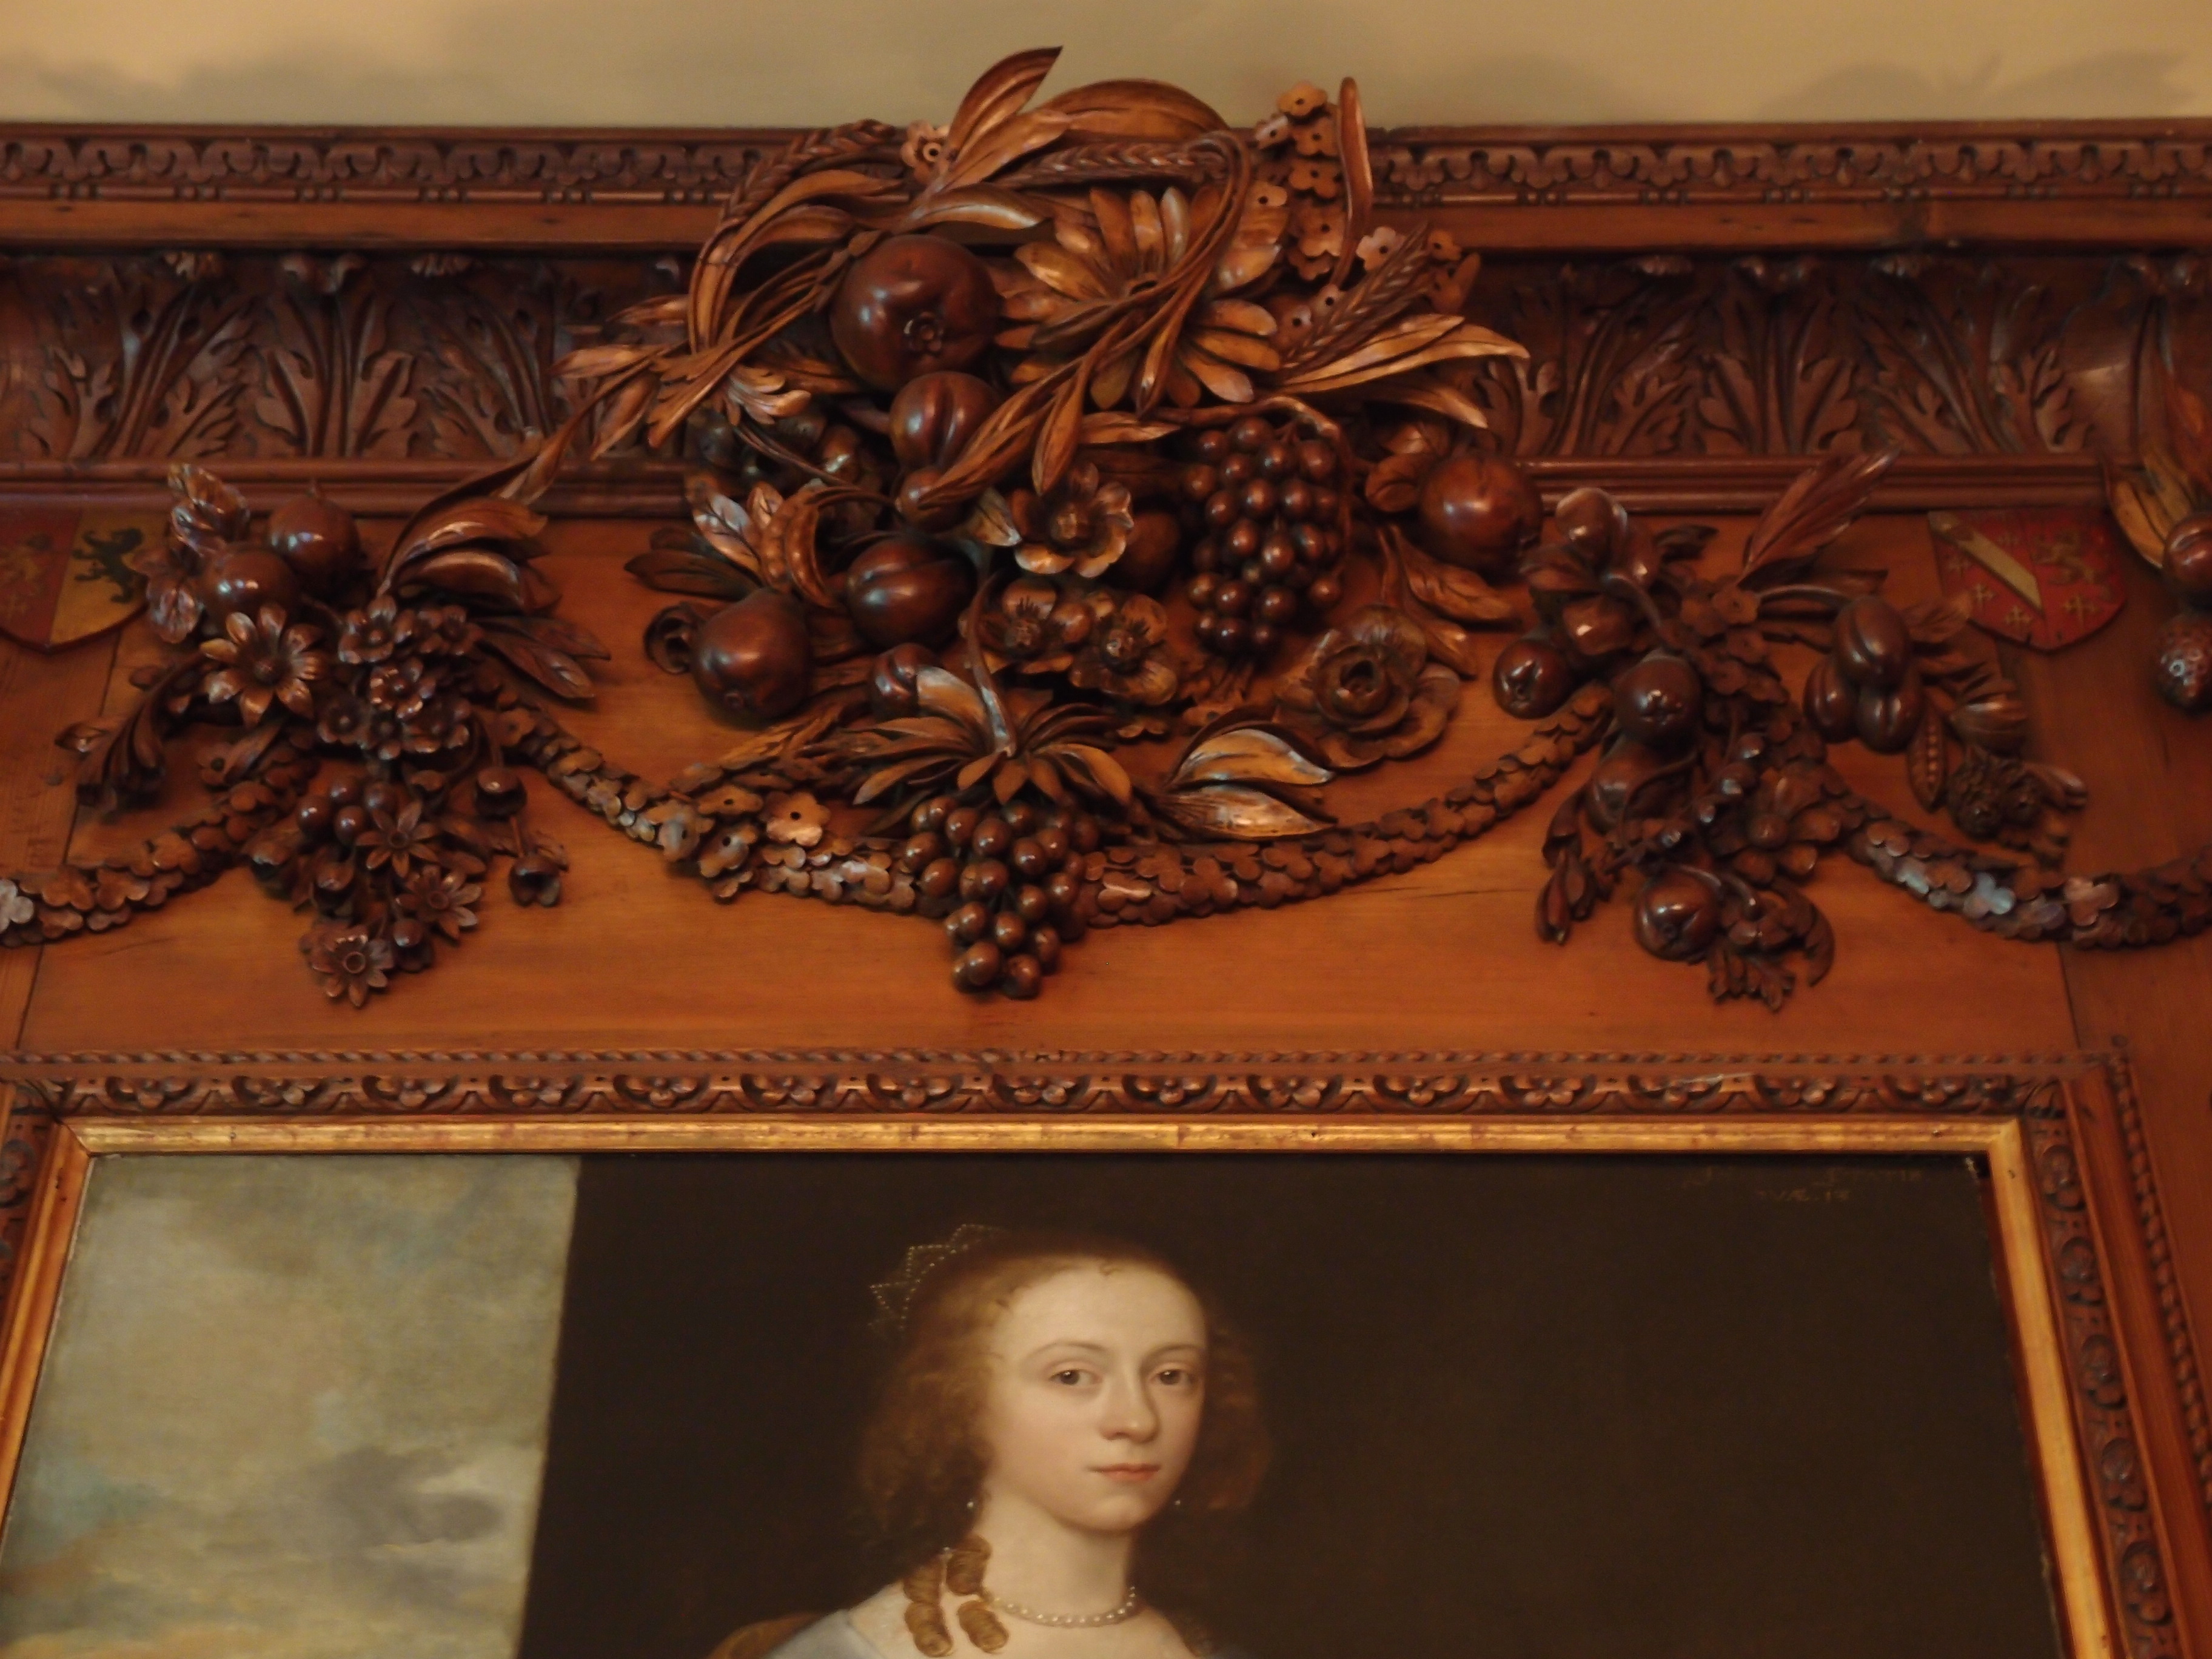 Grinling Gibbons' carvings crown---and rather outshine---a portrait of Lady Emma Anderton (which is actually OK, since Emma was simply a purchased portrait, and not a relative of the Crane family). This just goes to show, however, that even a beautiful lady cannot complete with Gibbons' artistry.